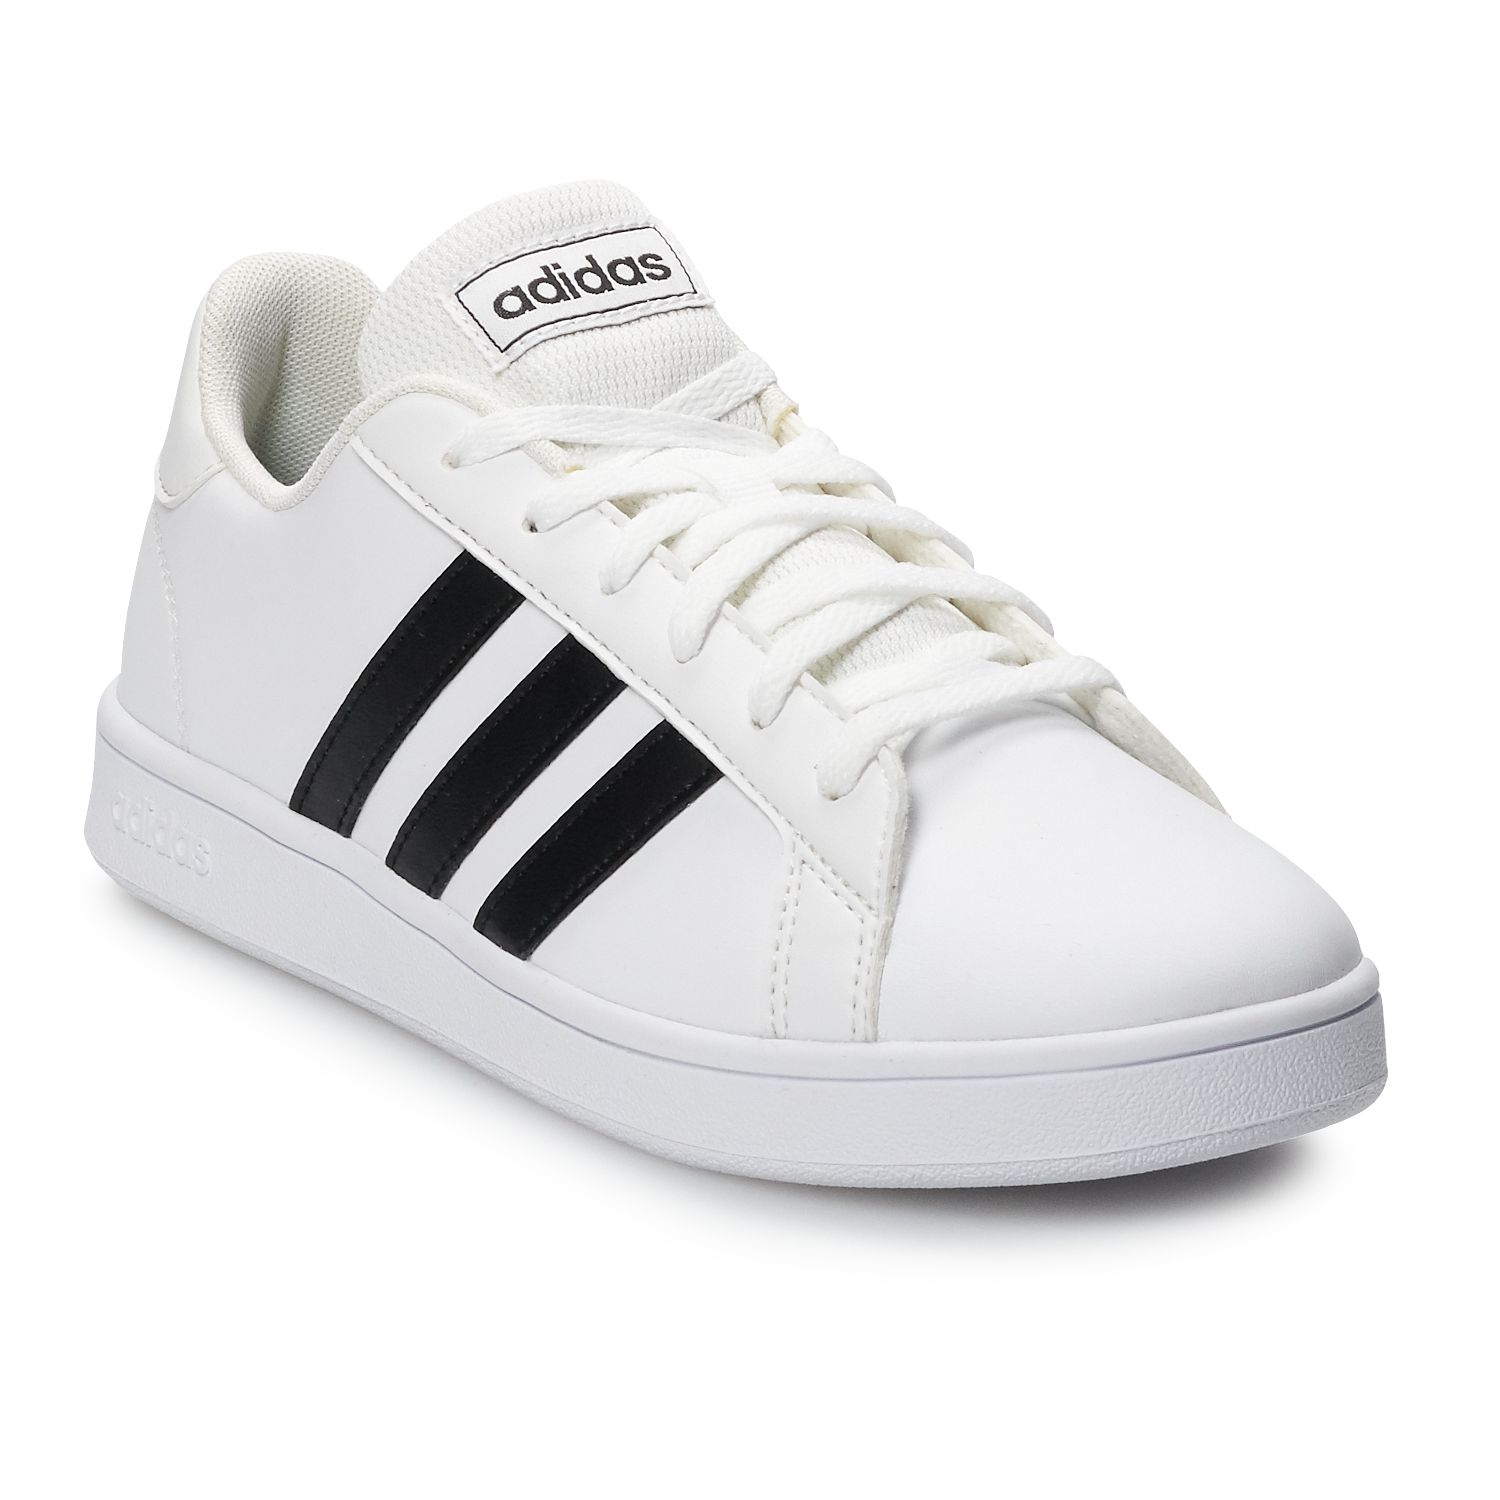 adidas childrens shoes